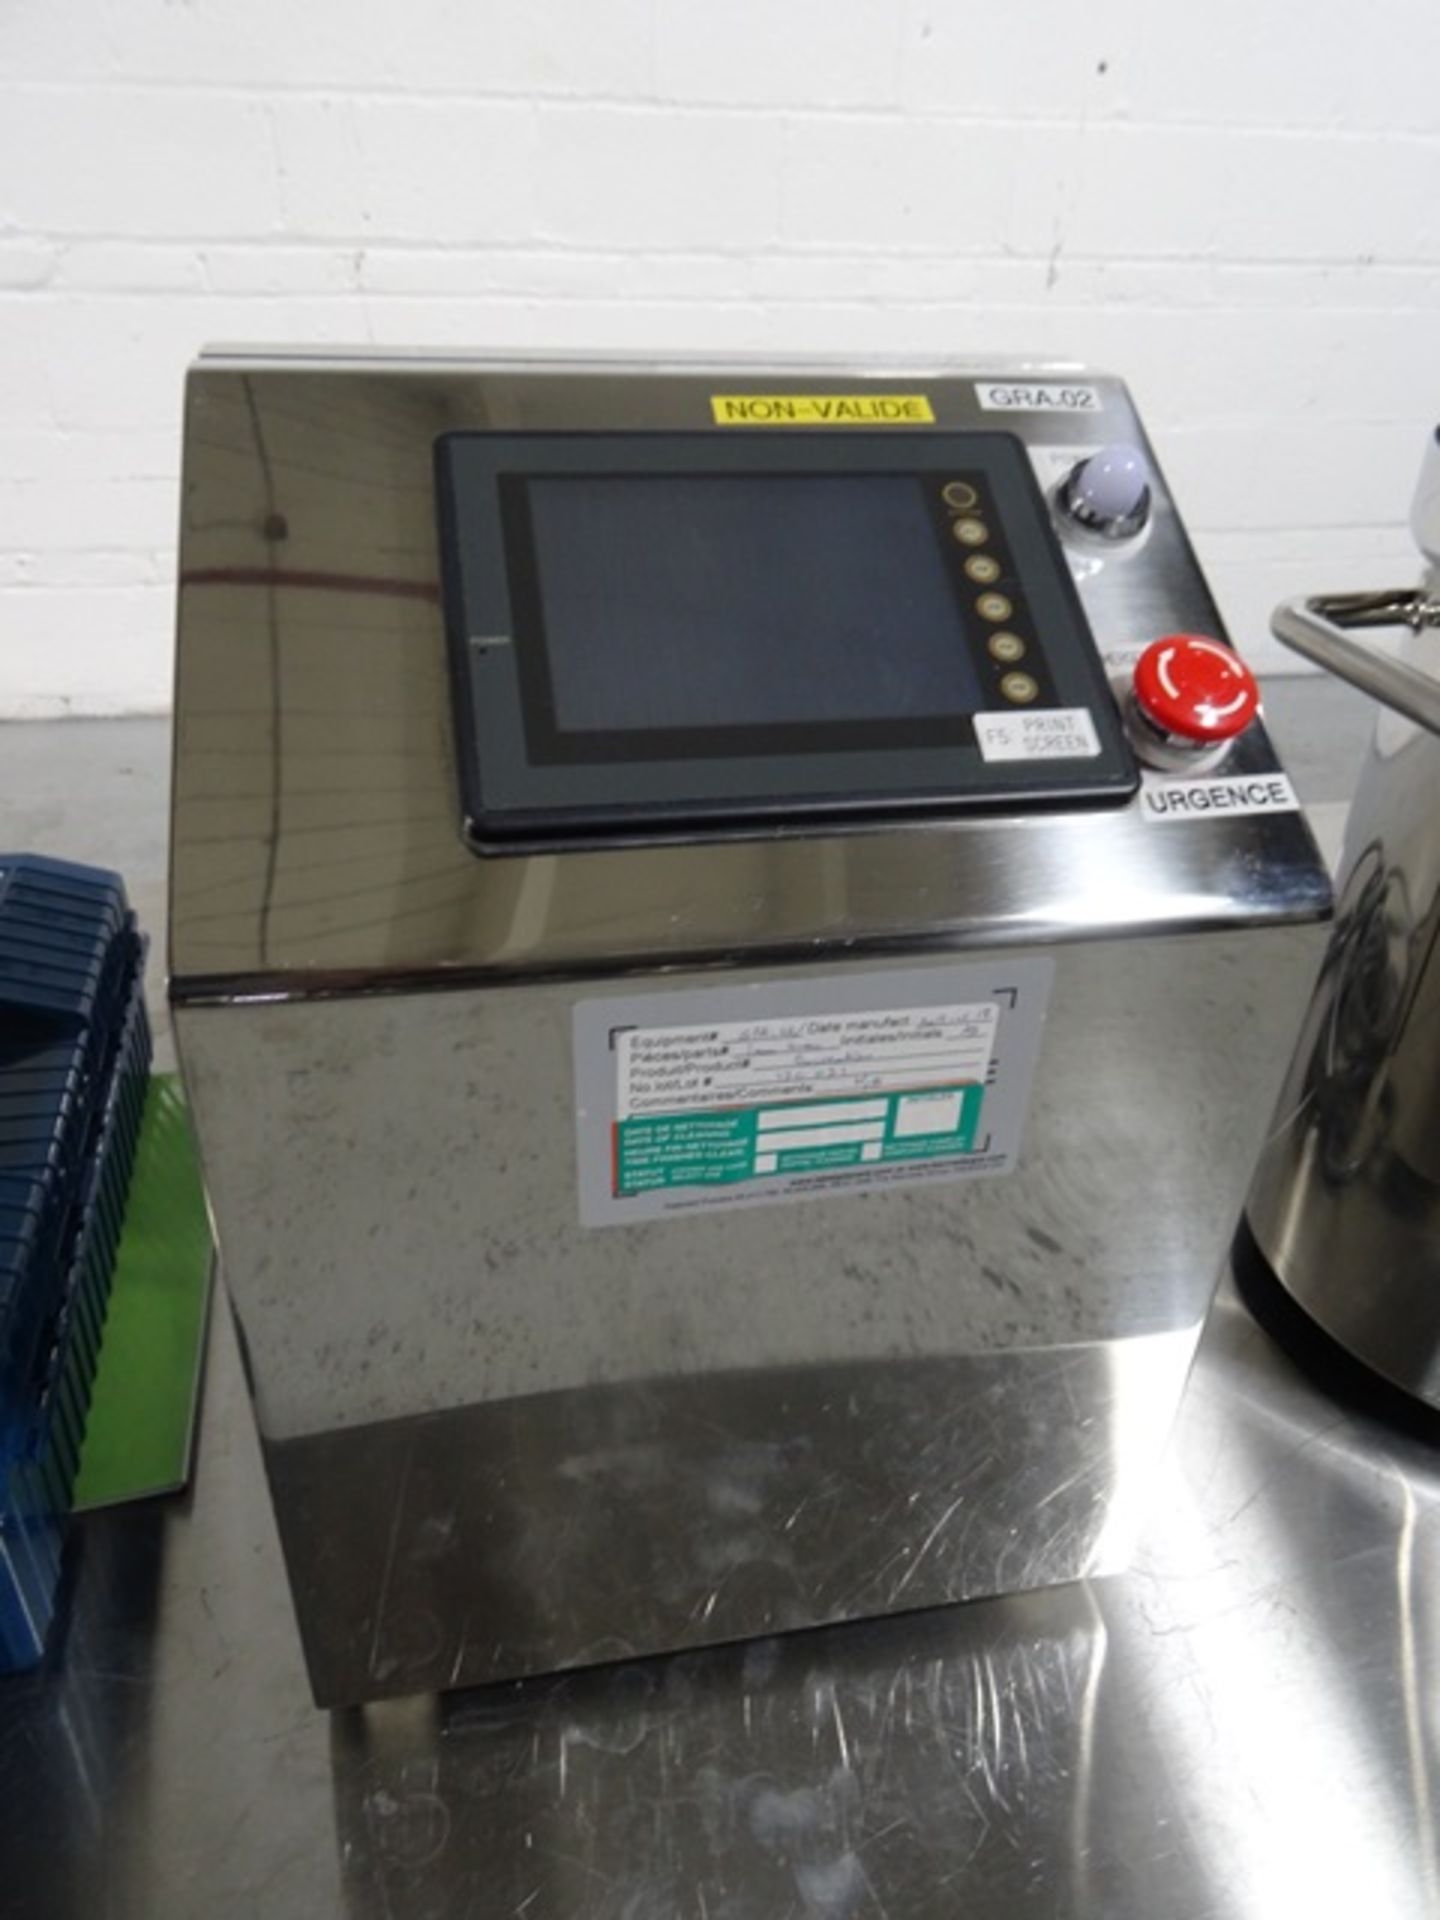 Fuji Paudal LCI Basket Granulator, model BR-150, stainless steel construction, with feed hopper, - Image 10 of 21